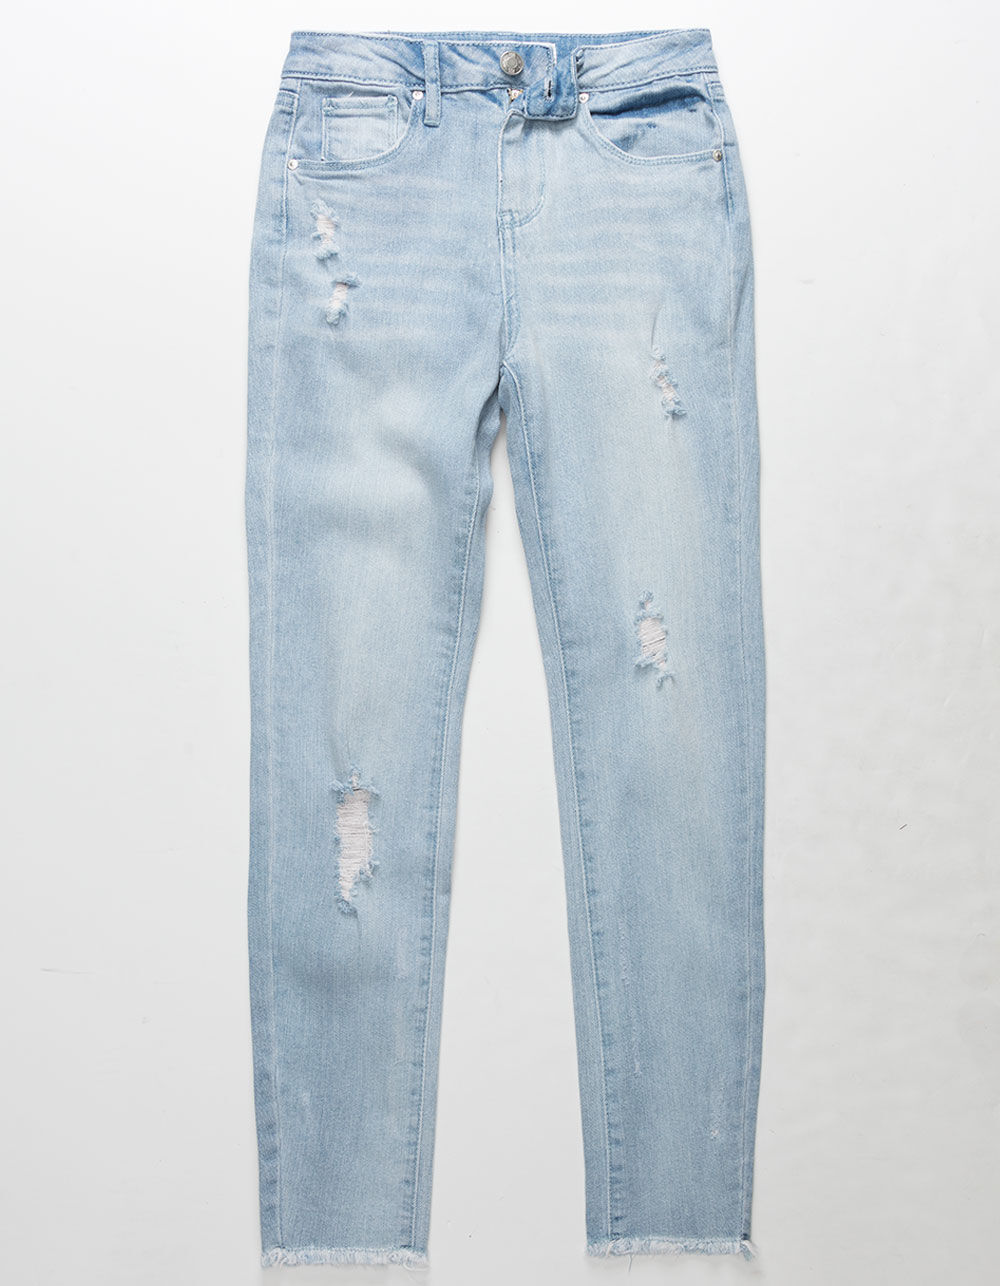 RSQ Cali High Rise Crop Girls Ripped Skinny Jeans - LIGHT WASH | Tillys